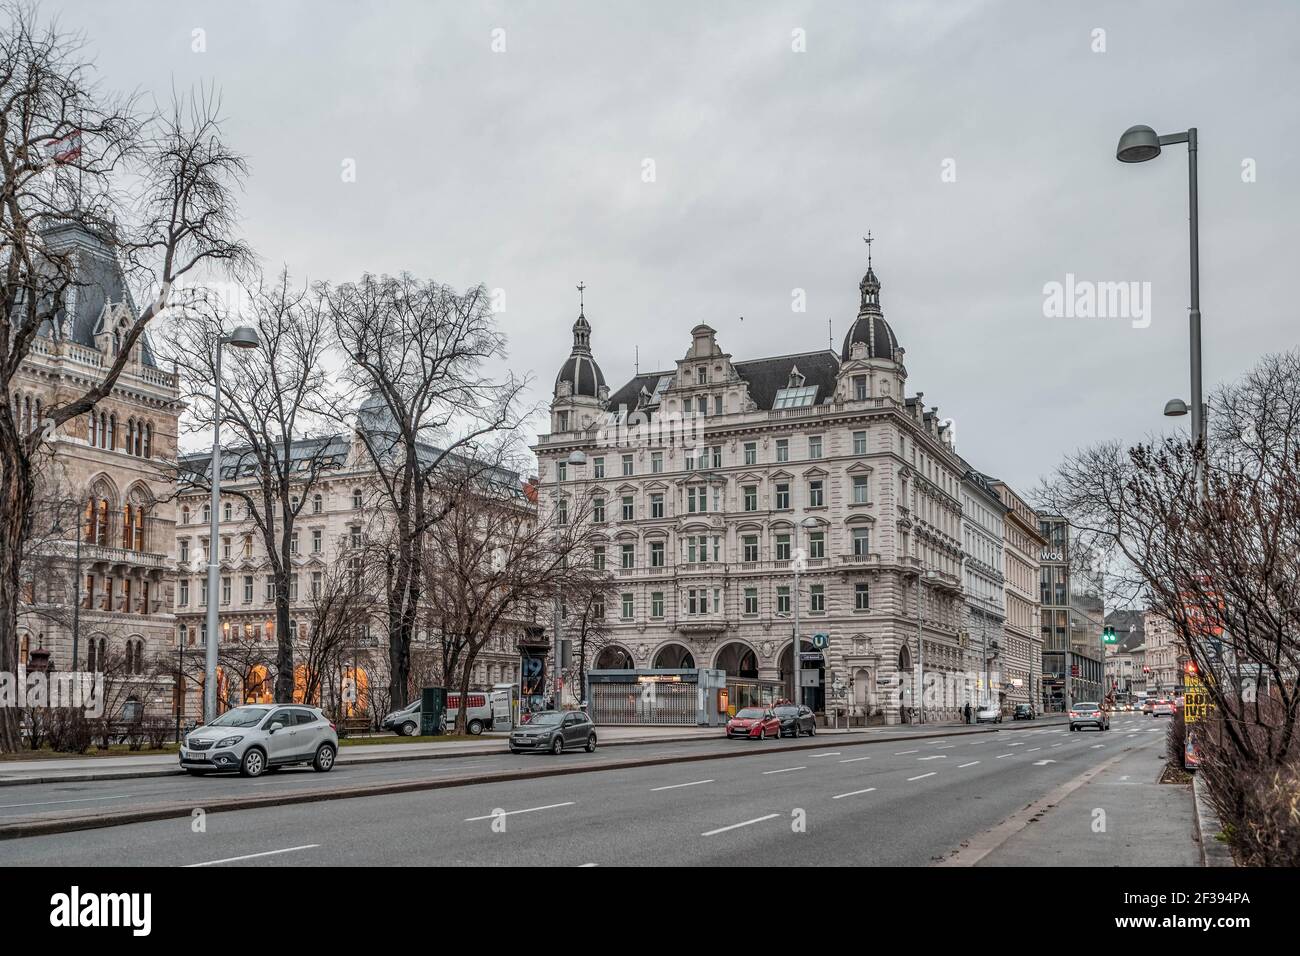 Vienna, Austria - Feb 7, 2020: Street view of neo-classical building near city hall in winter morning Stock Photo